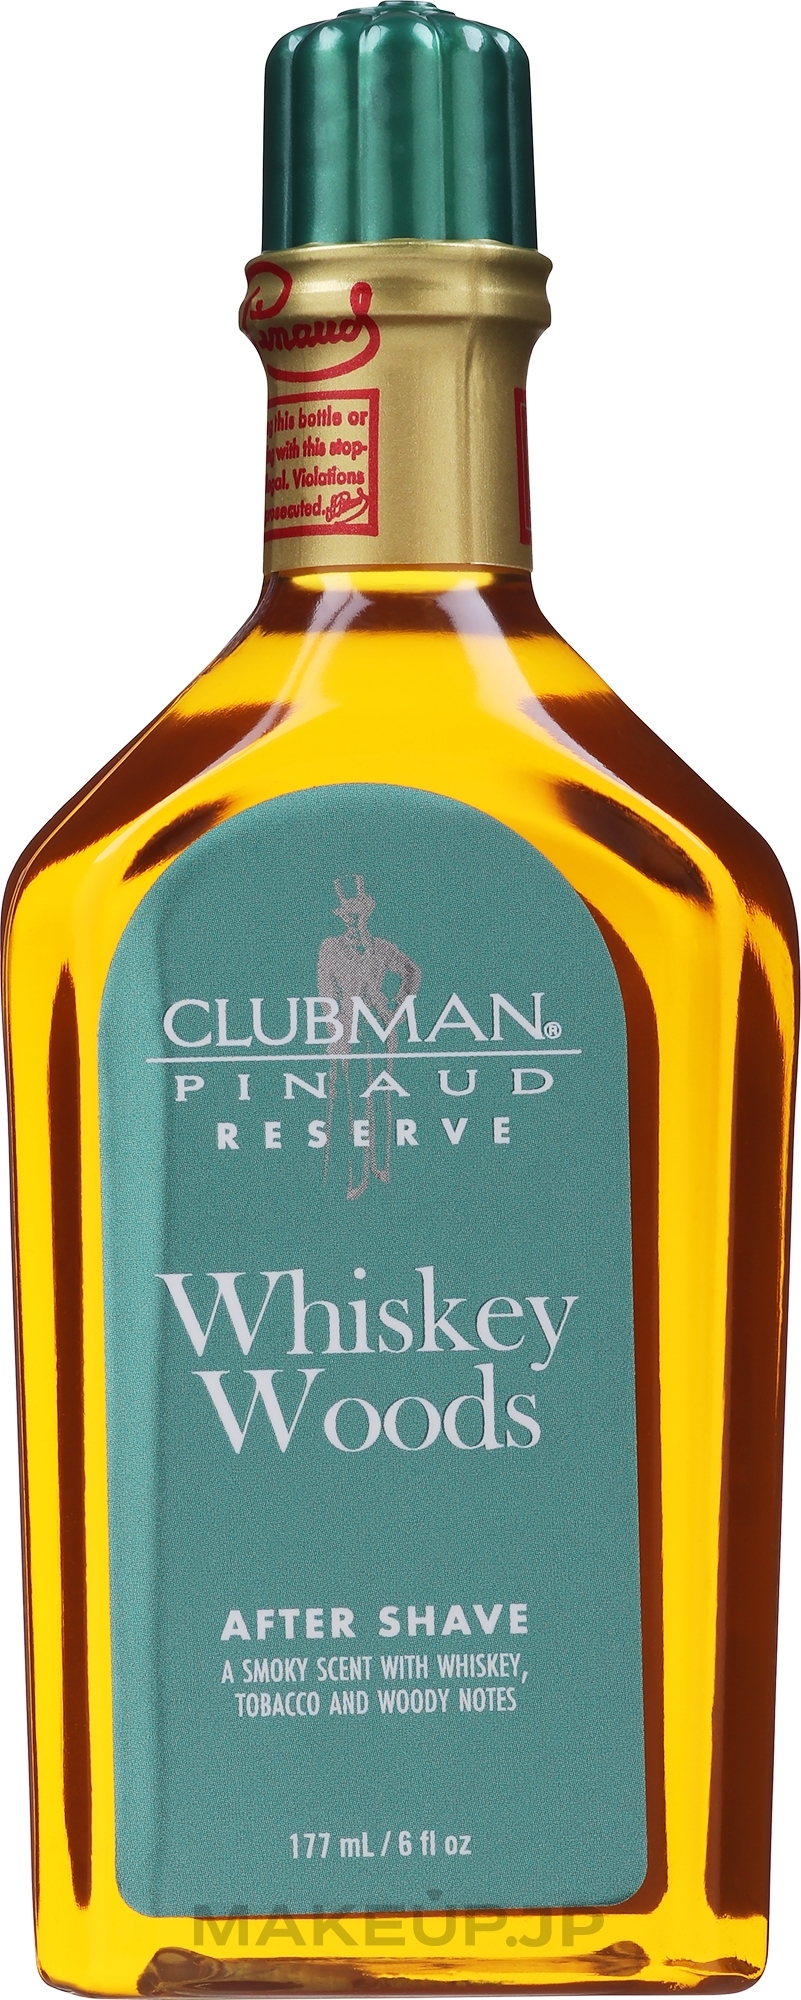 Clubman Pinaud Whiskey Woods - After Shave Lotion — photo 177 ml